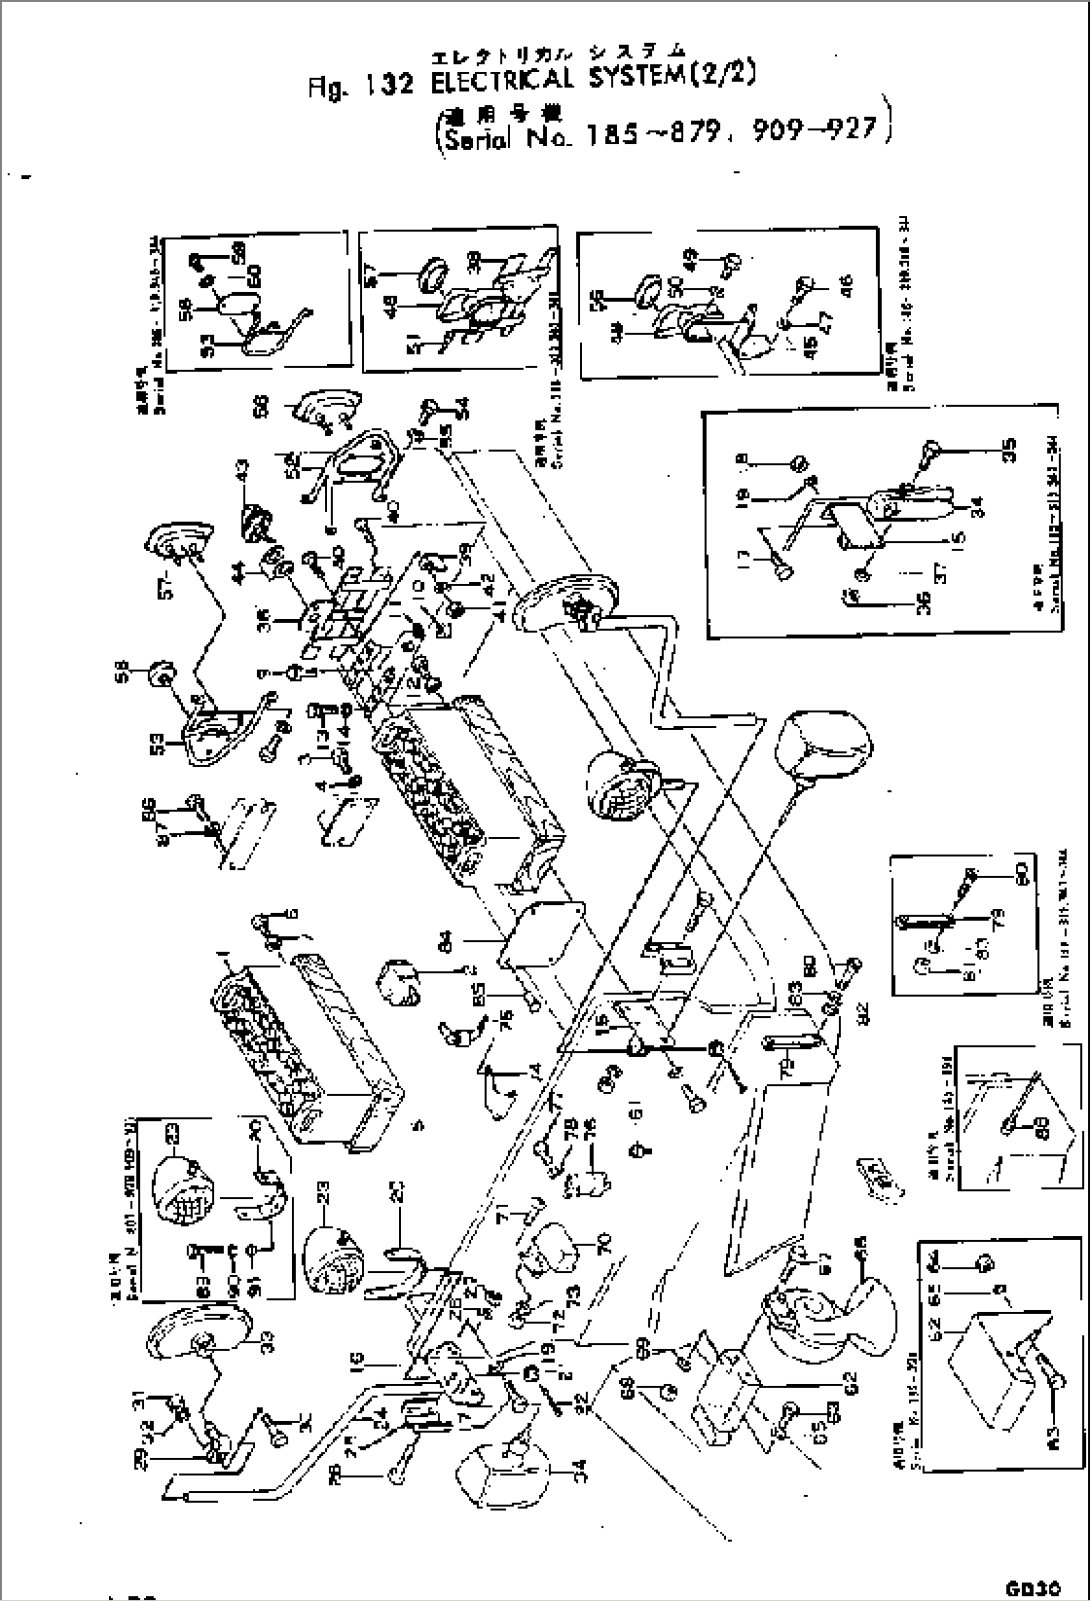 ELECTRICAL SYSTEM (2/2)(#185-927)